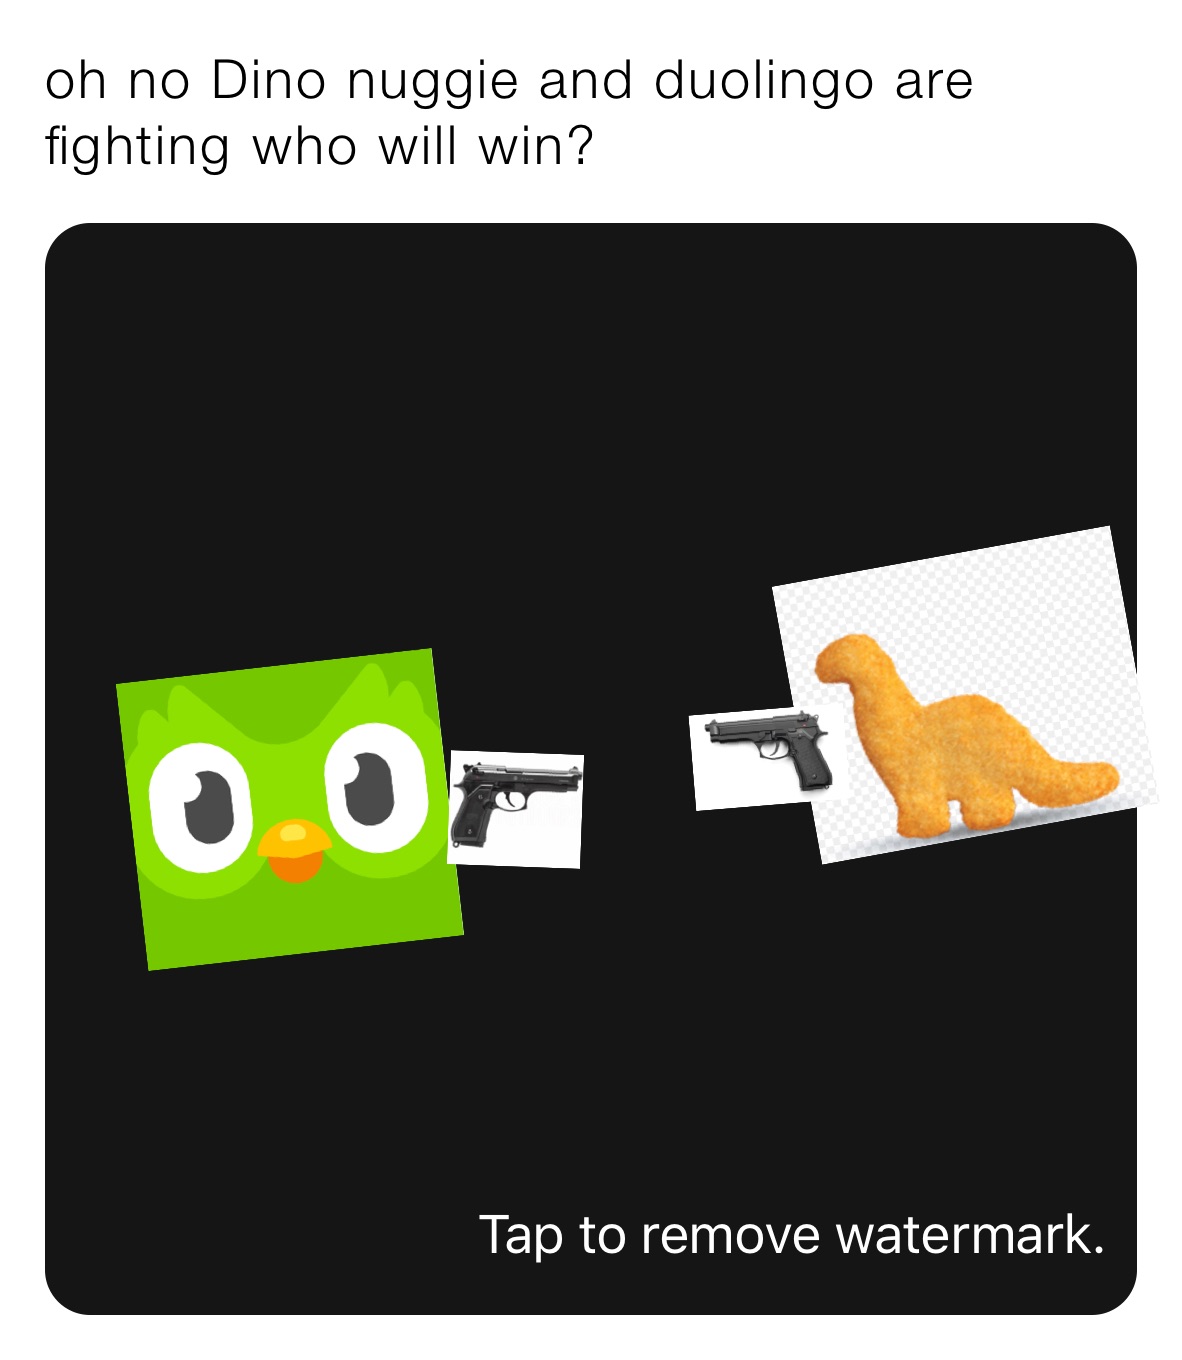 oh no Dino nuggie and duolingo are fighting who will win?